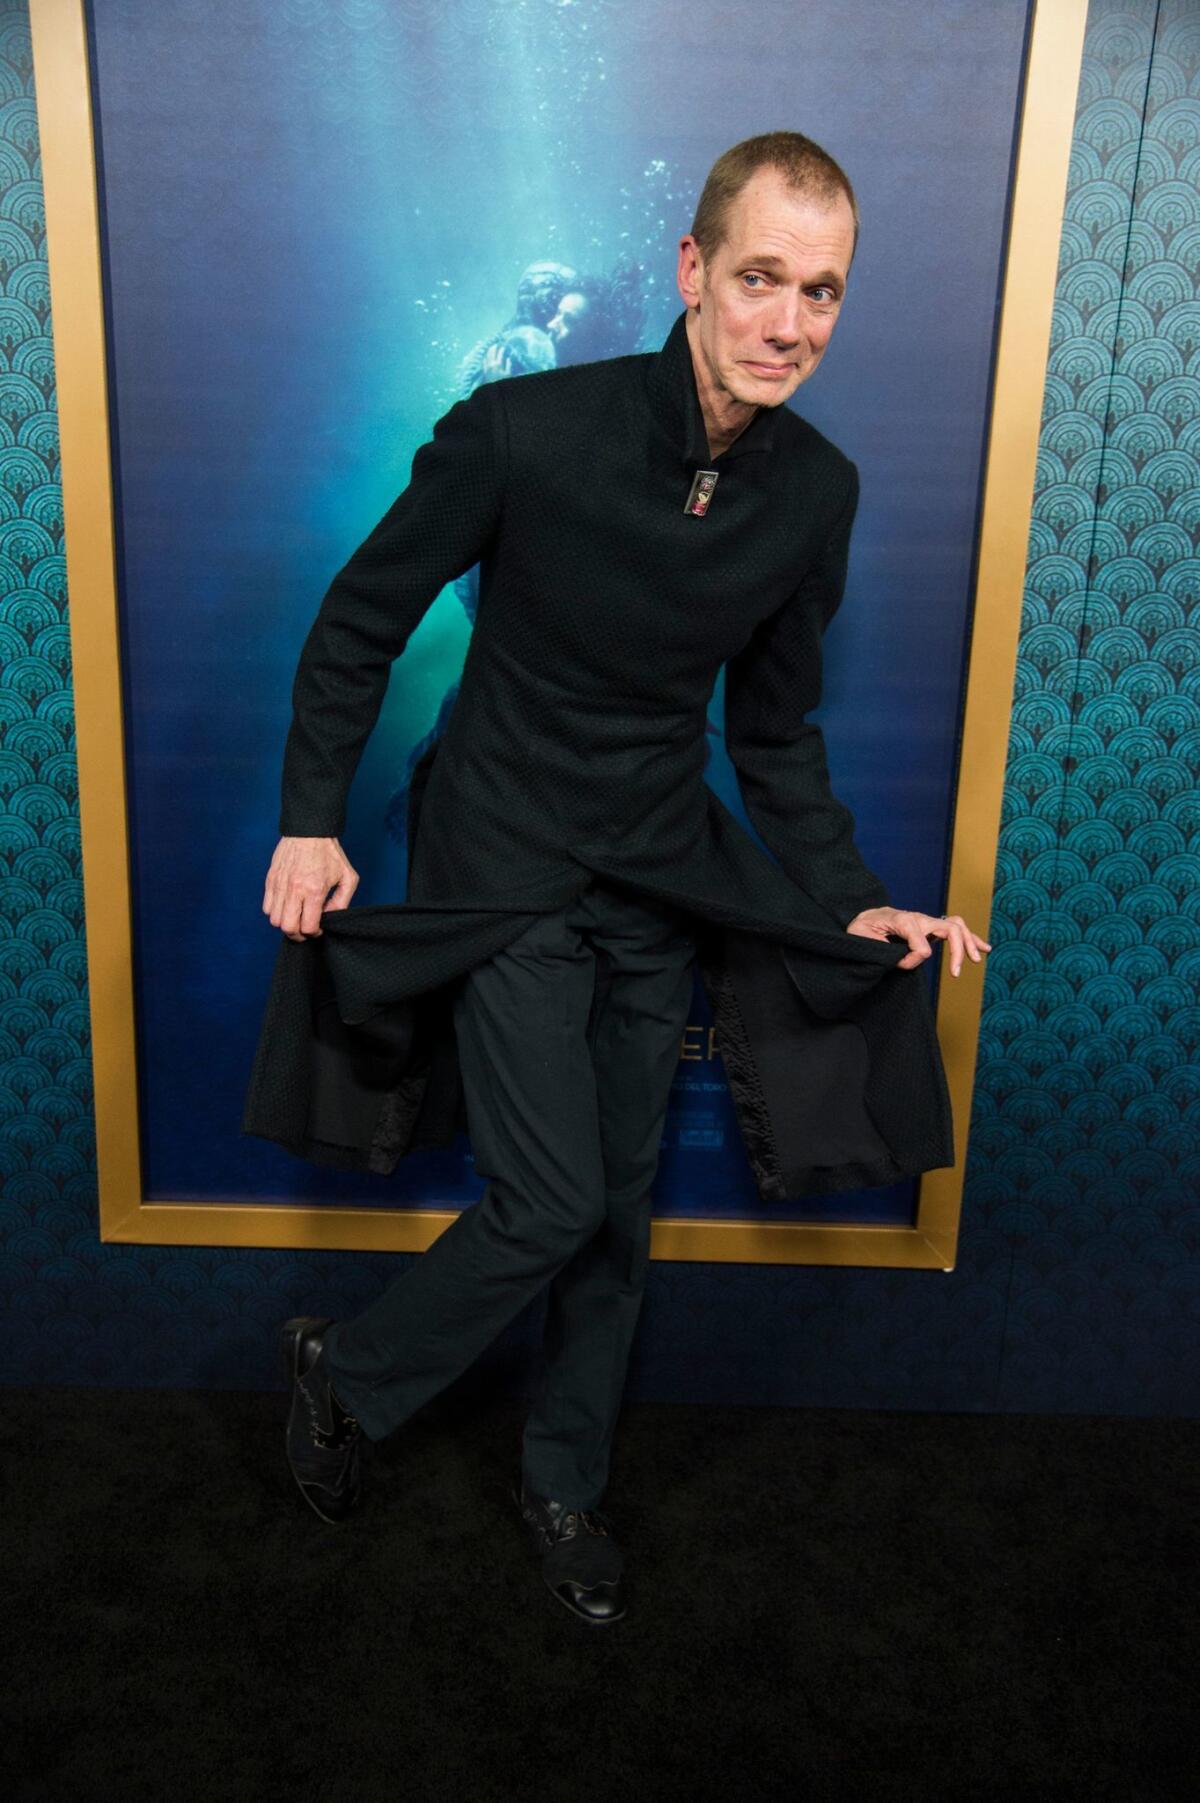 Actor Doug Jones at the premiere of "The Shape of Water" at the Academy of Motion Pictures Arts and Science in Beverly Hills.